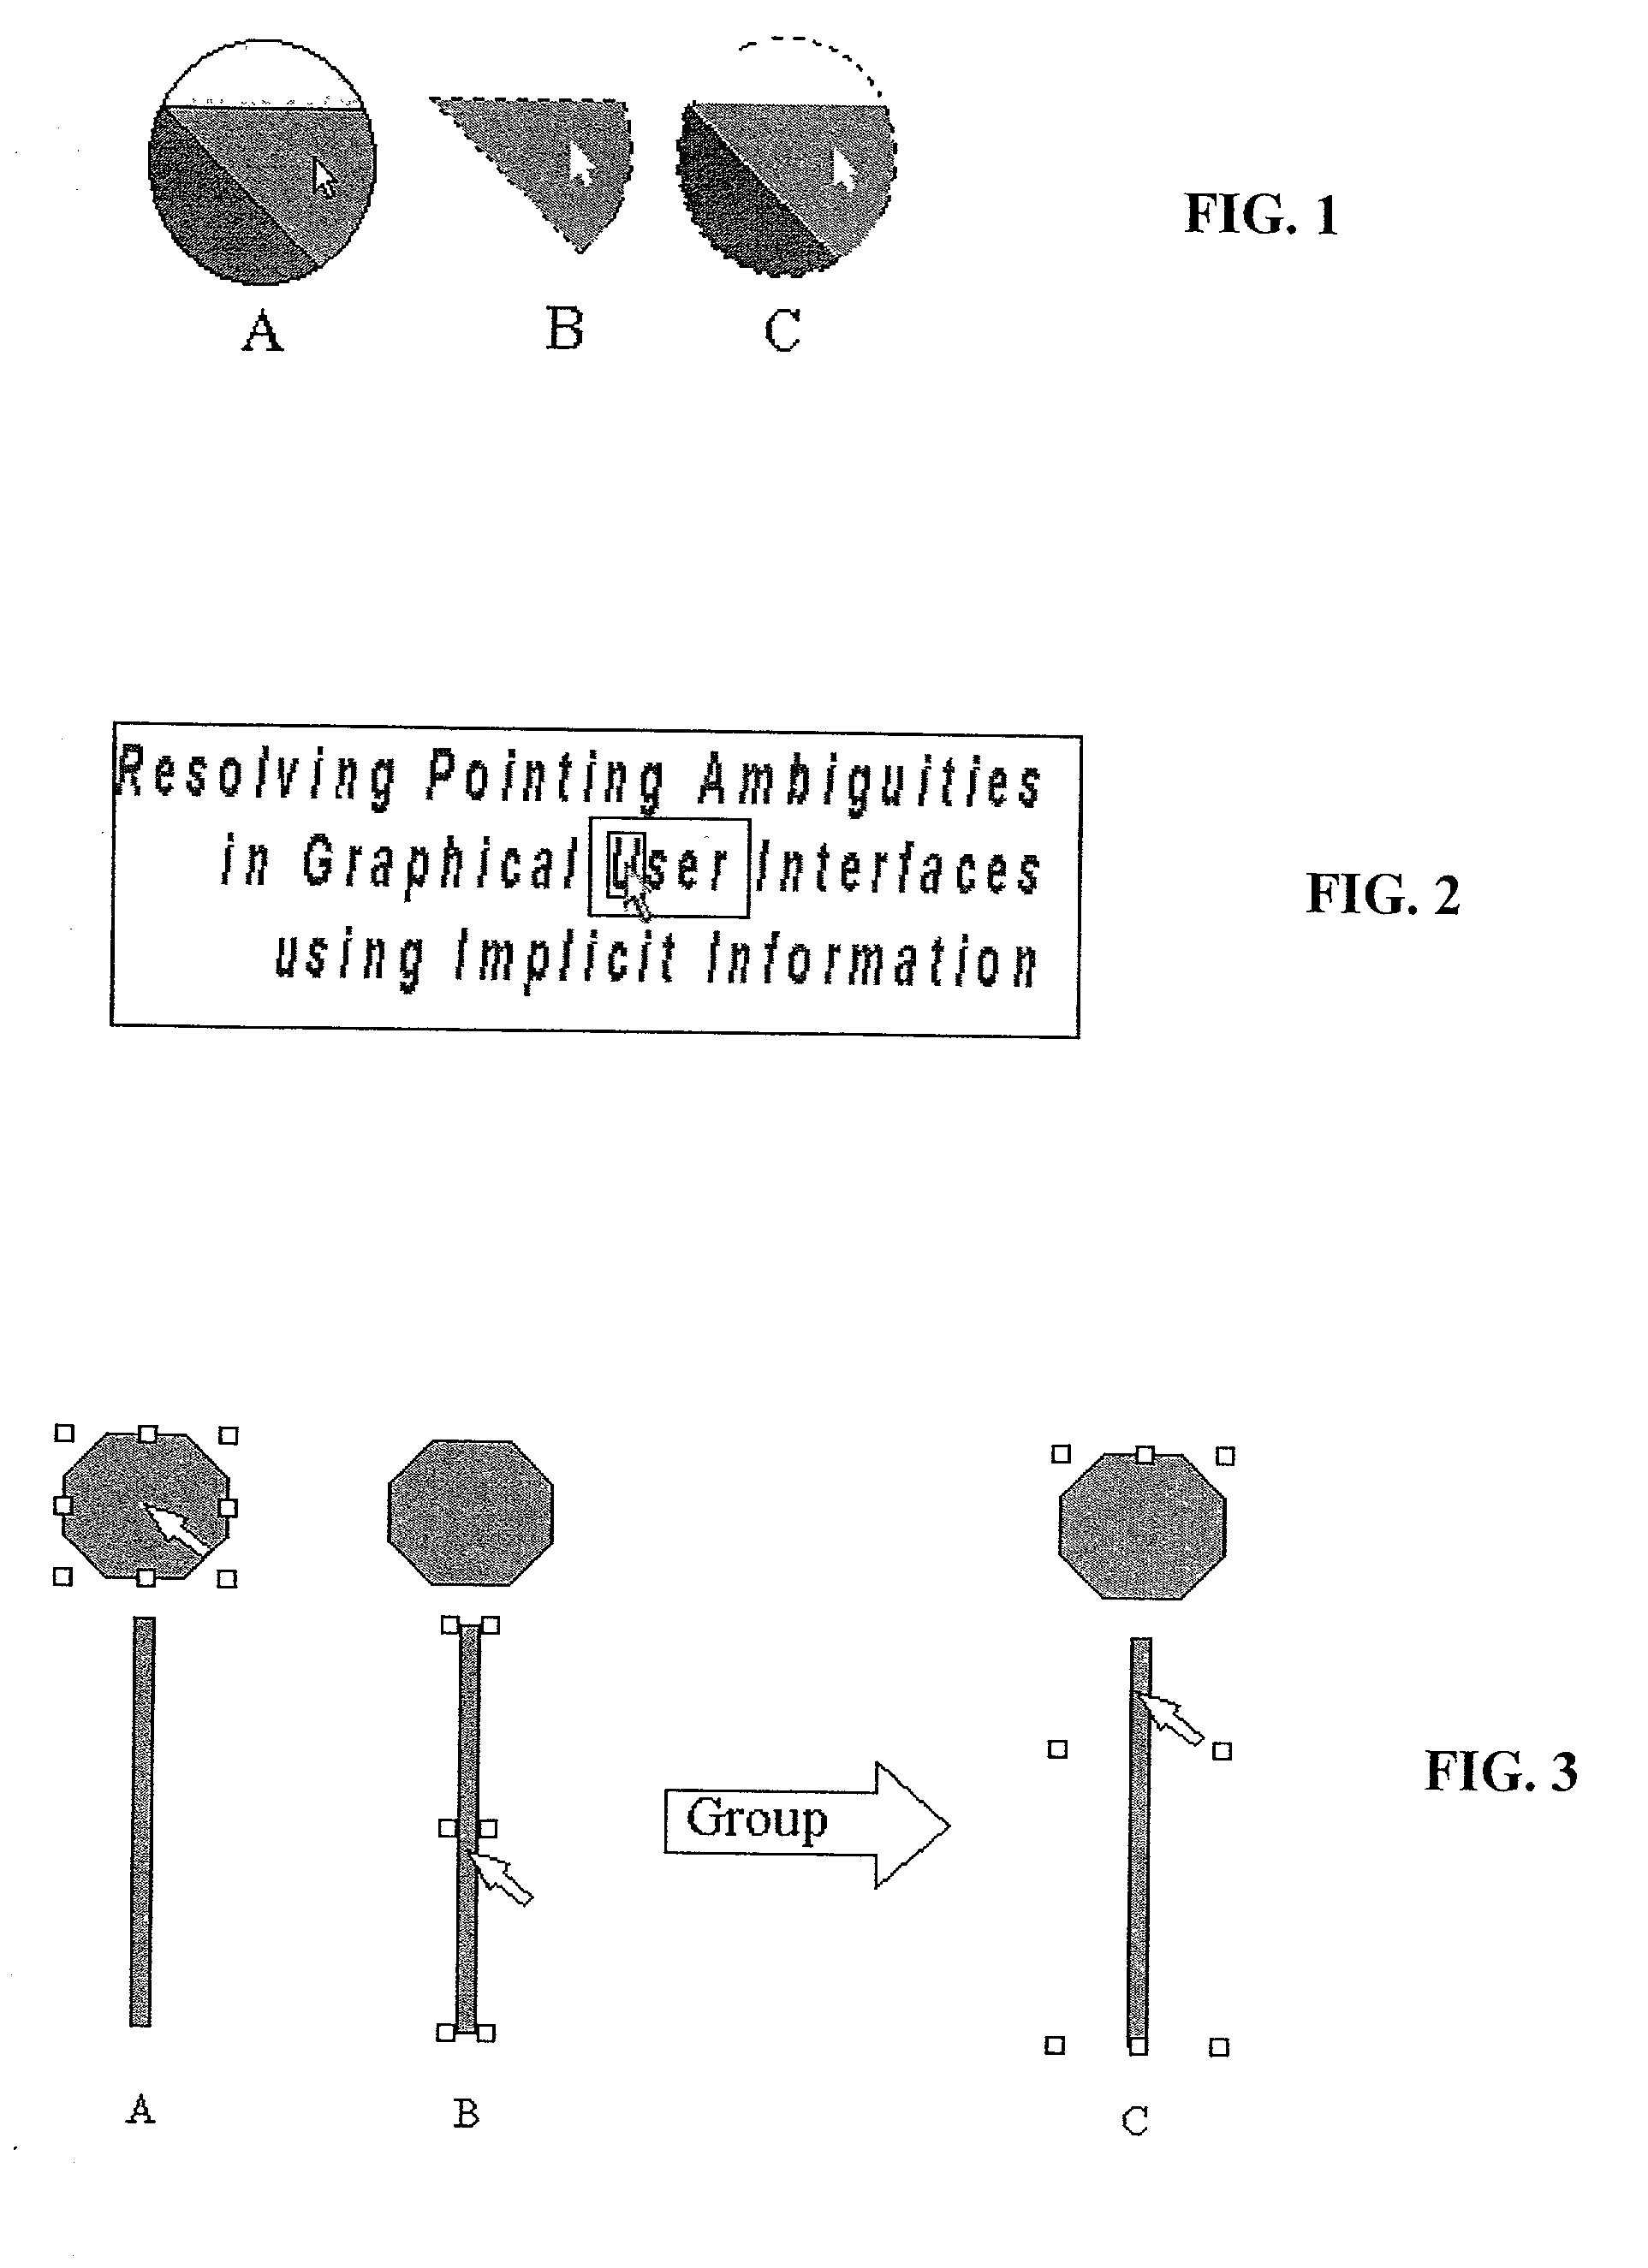 Method and system for implicitly resolving pointing ambiguities in human-computer interaction (HCI)